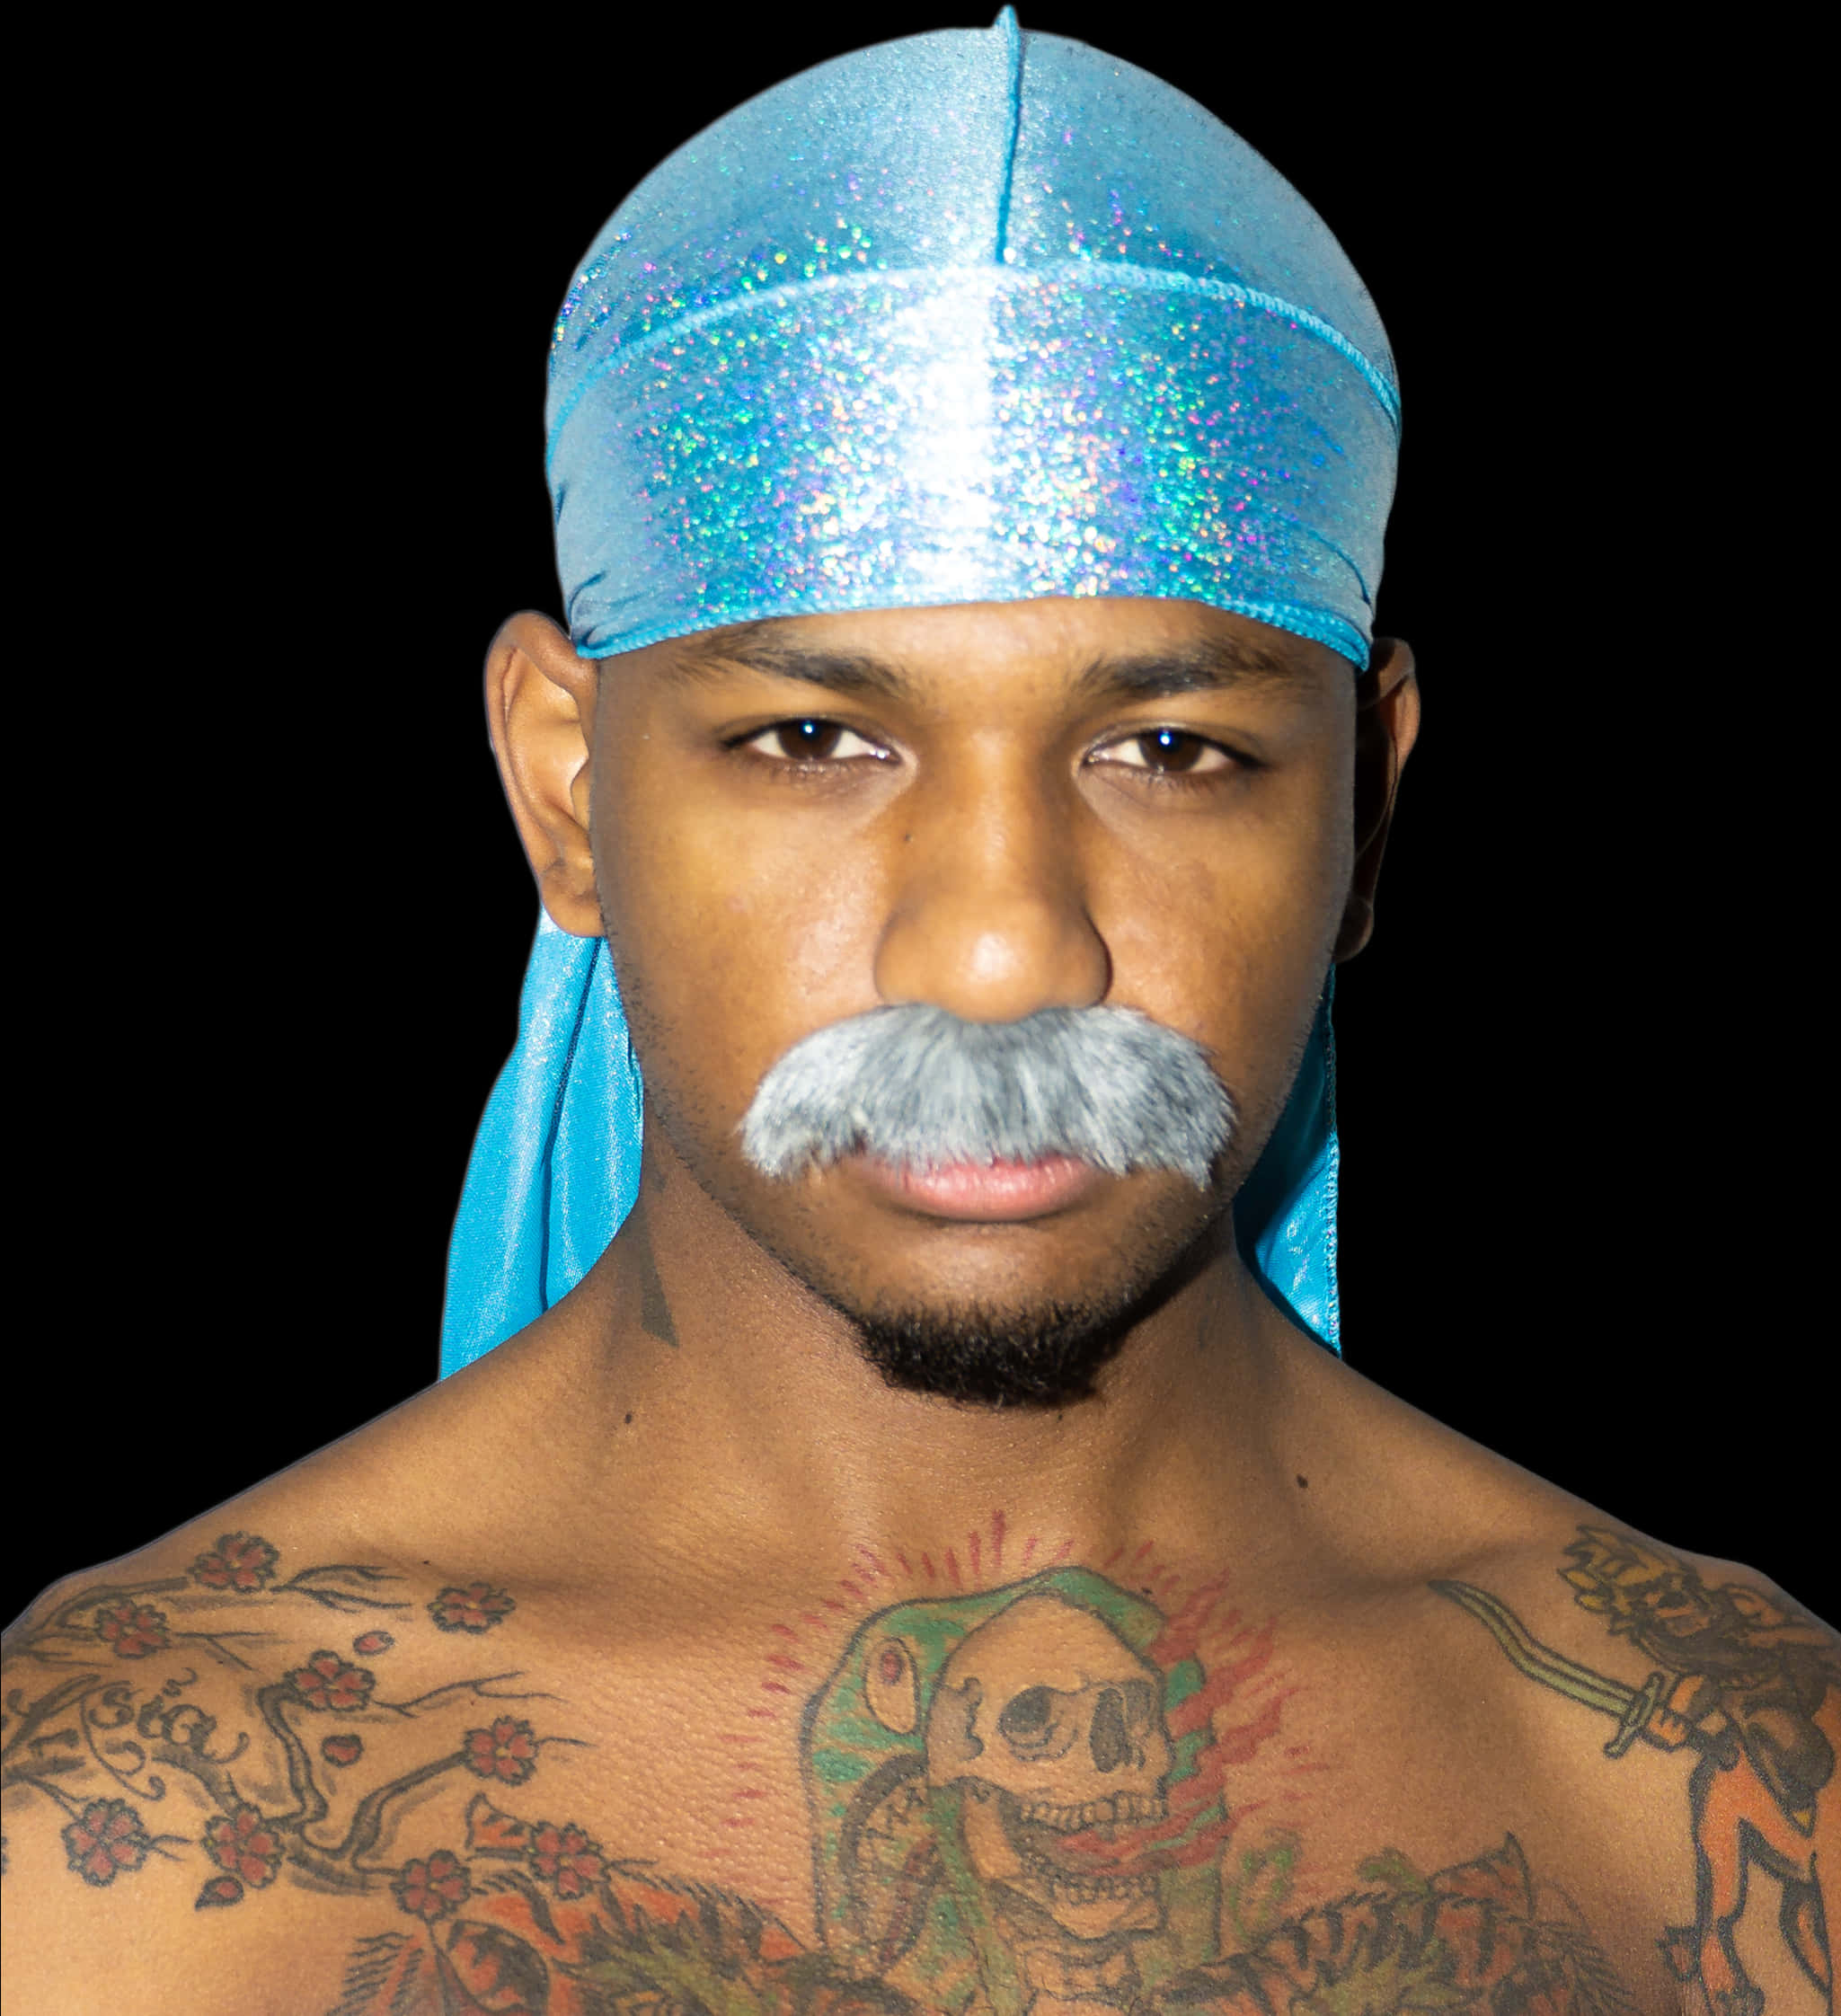 A Man With A Mustache And A Blue Head Scarf